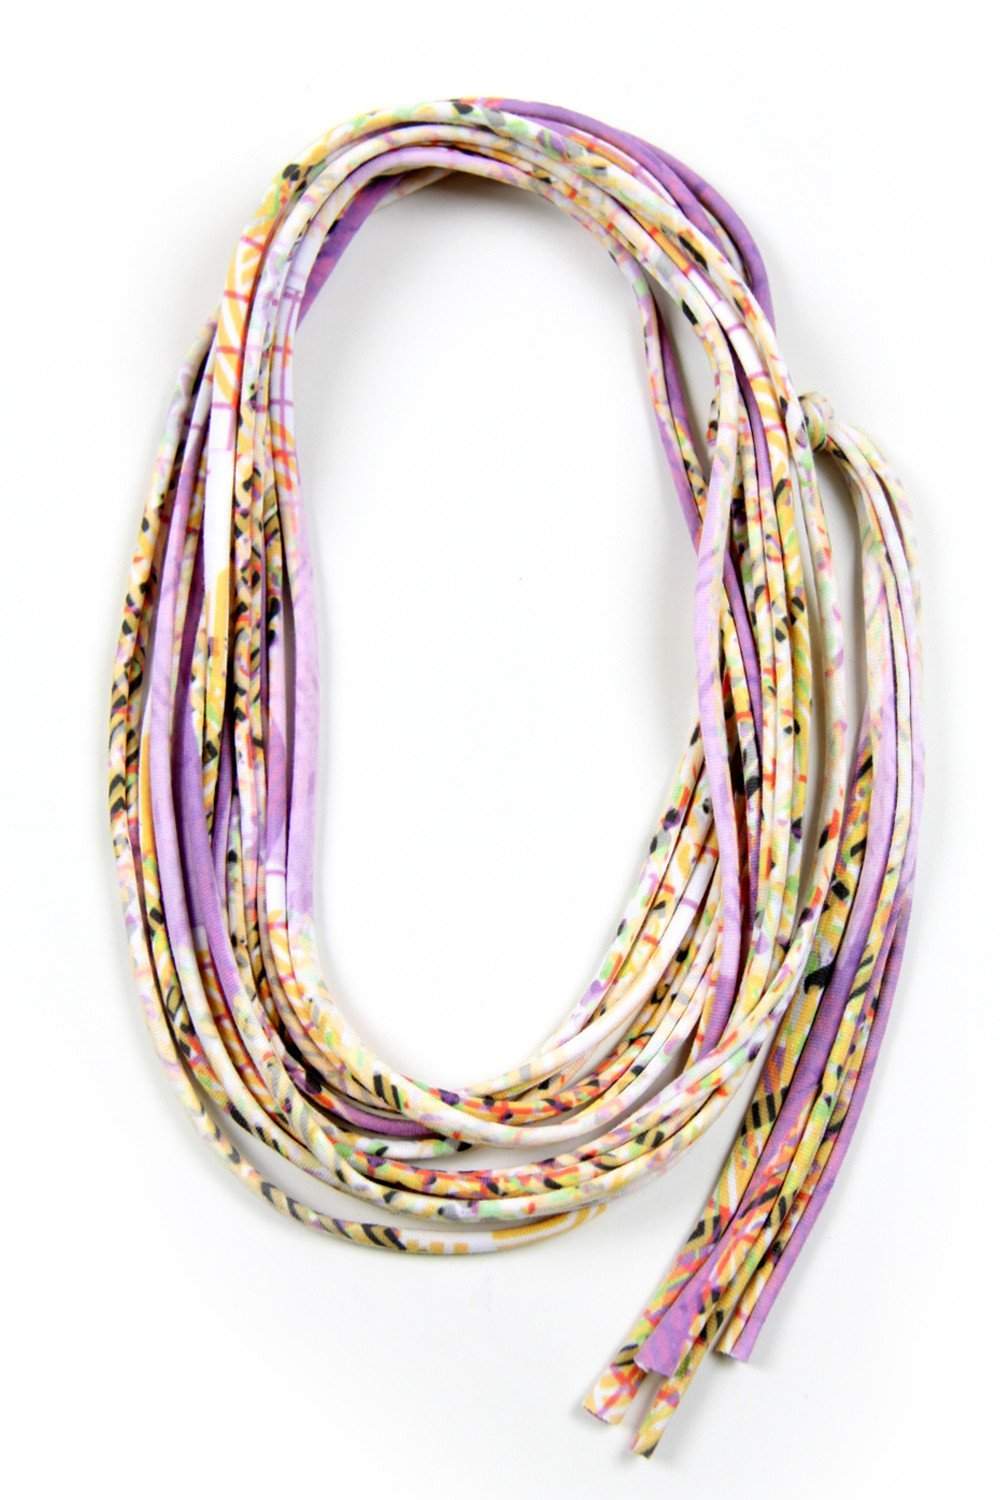 Lavender Yellow Skinny Scarf Necklace-scarves-Necklush